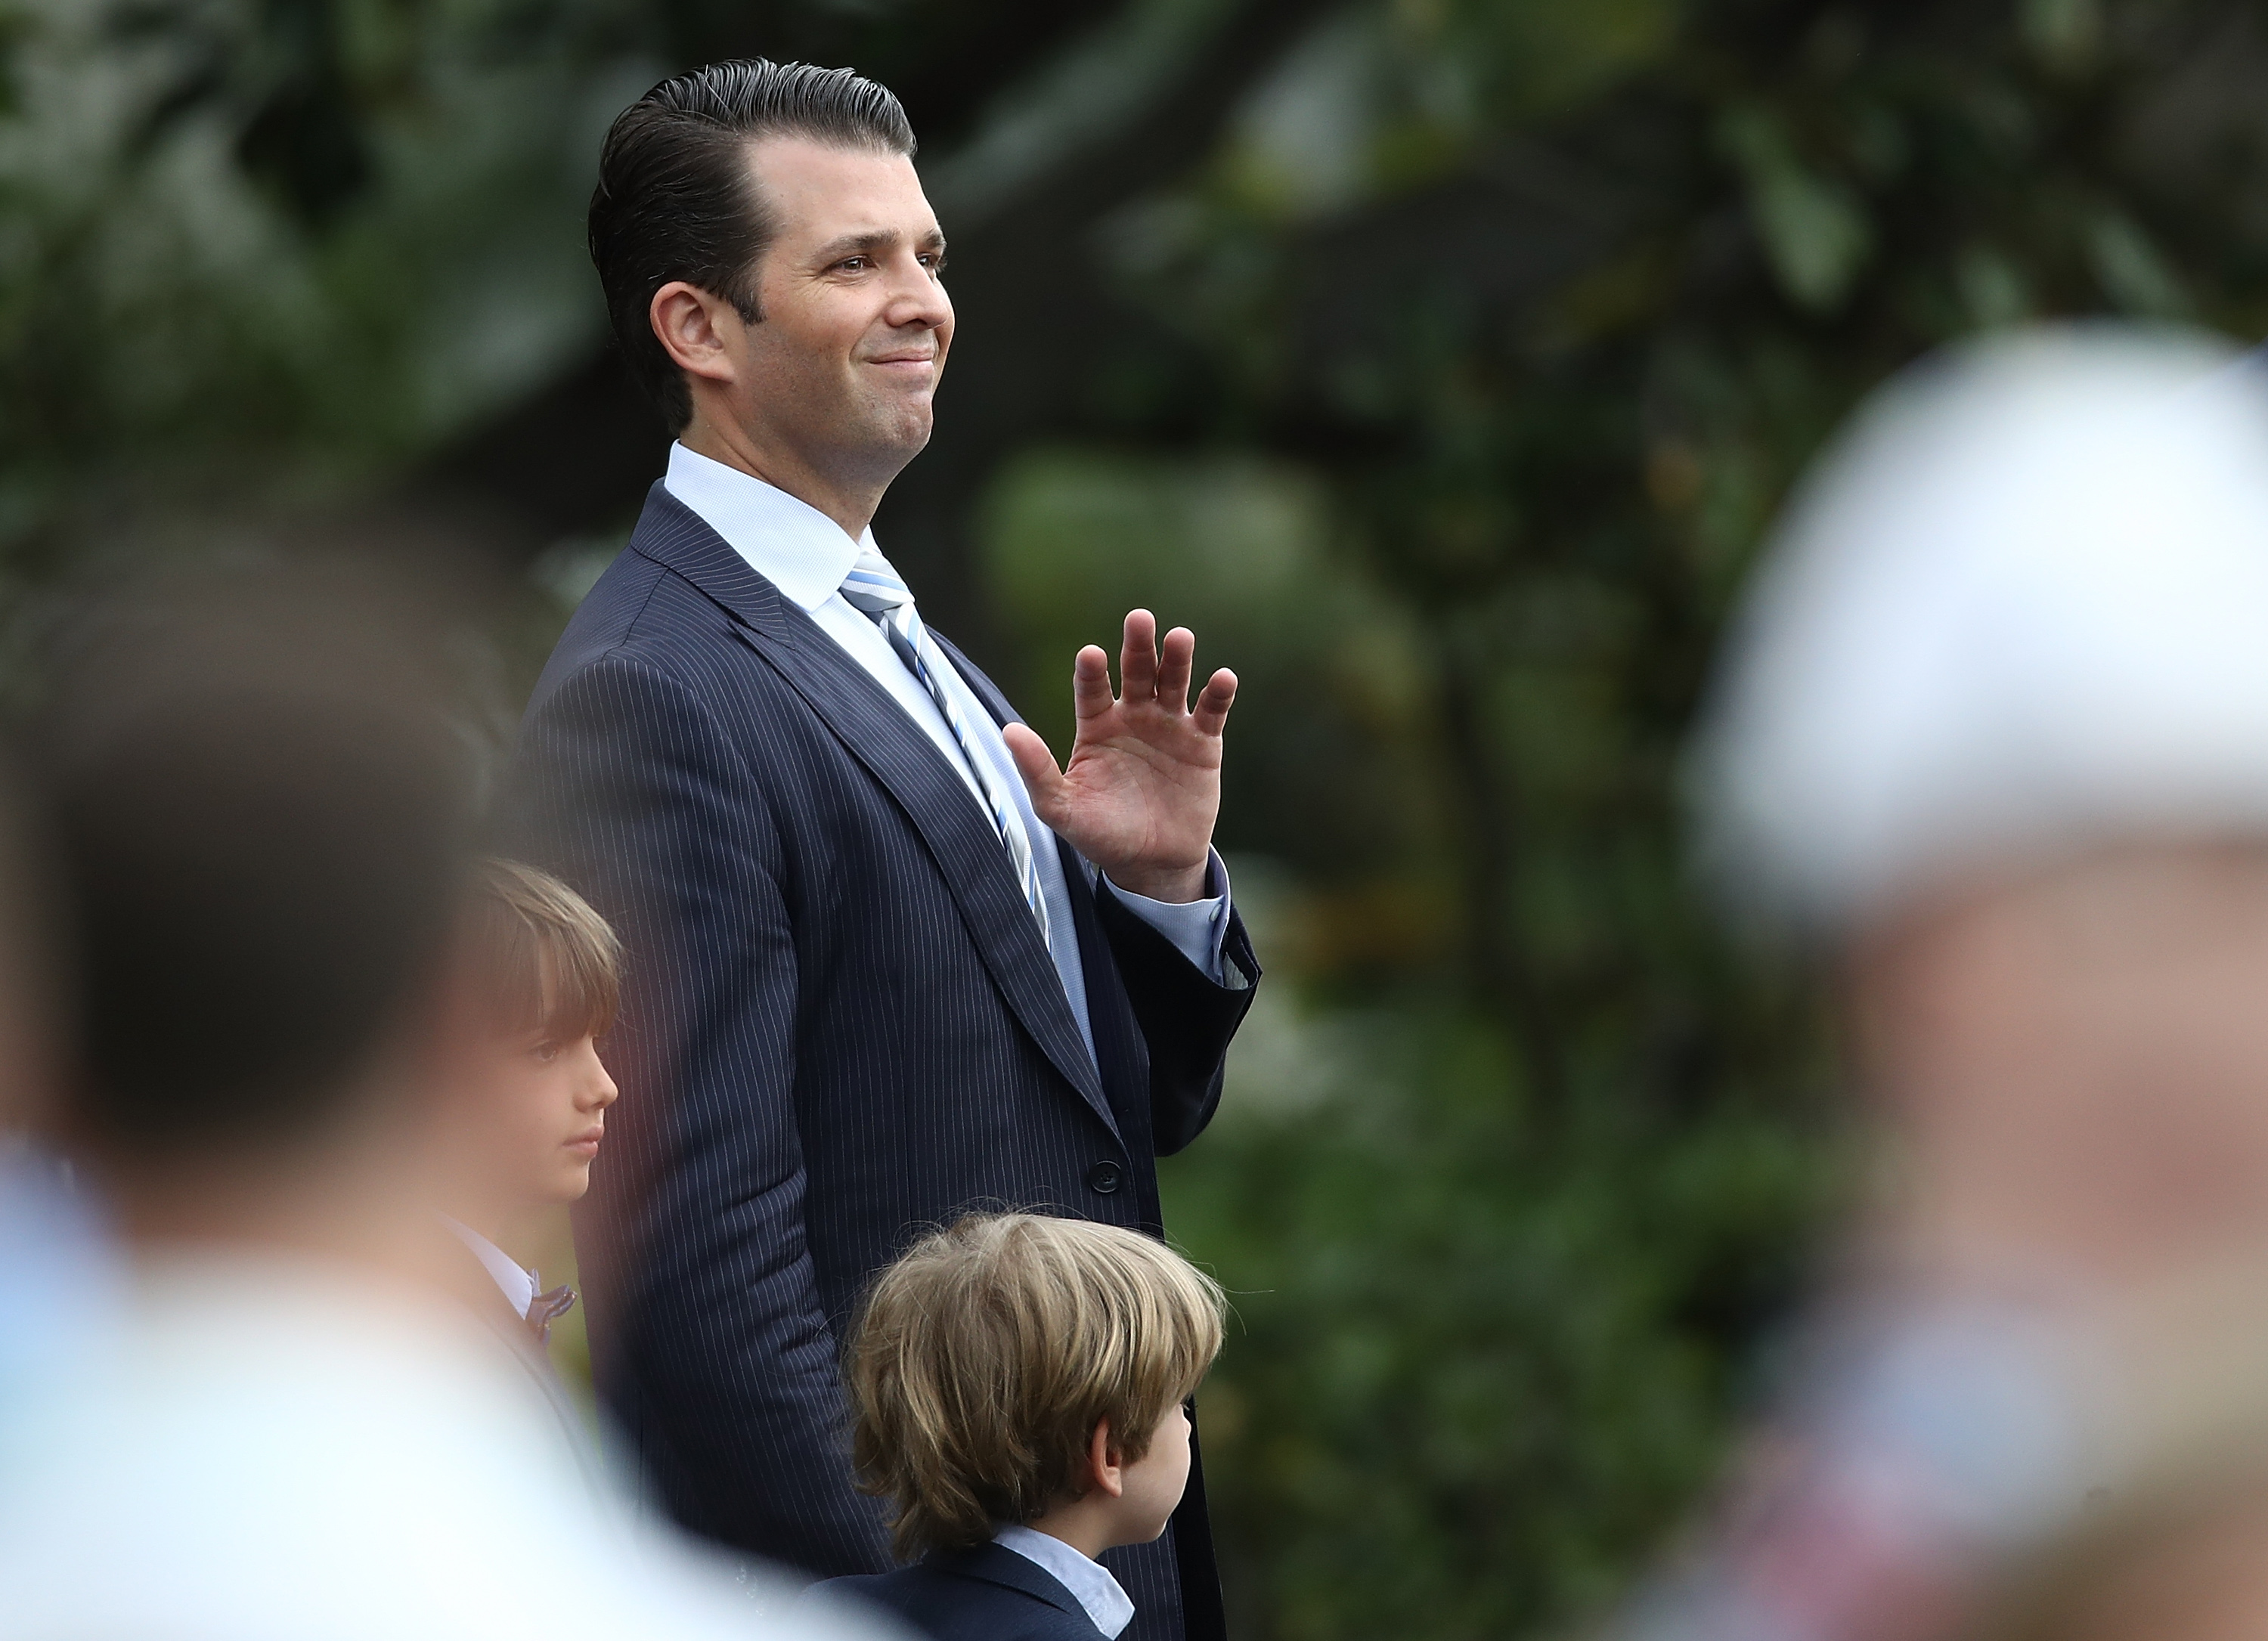 Donald Trump Jr. at the White House